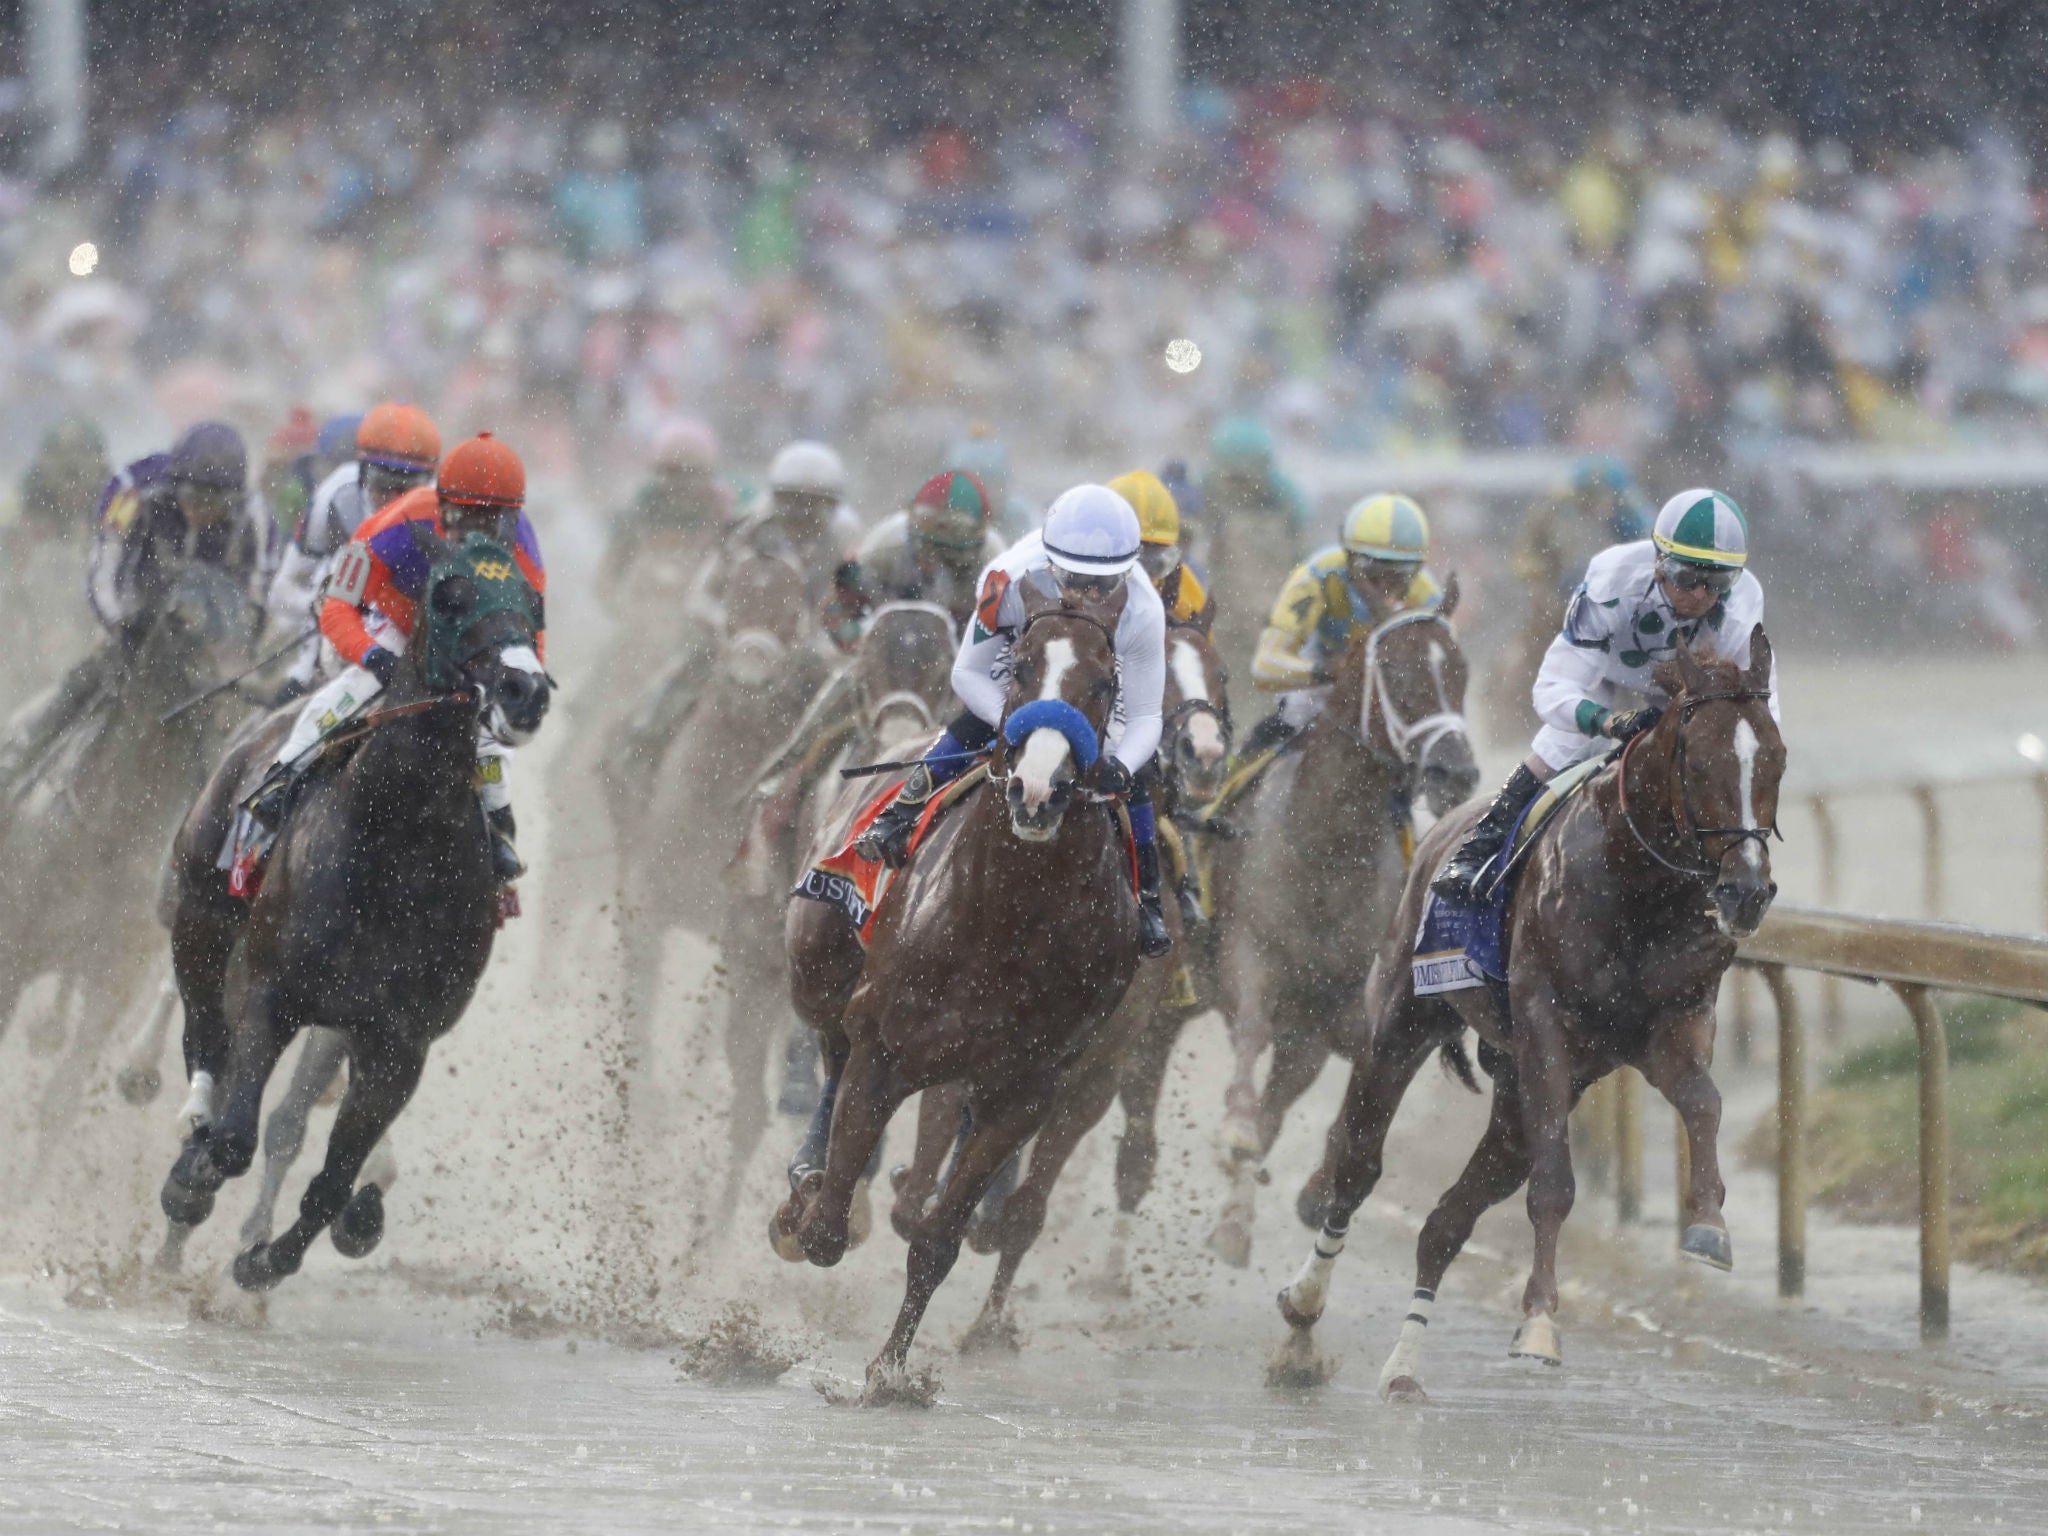 More than 2.31 inches of rain had fallen by the race's start